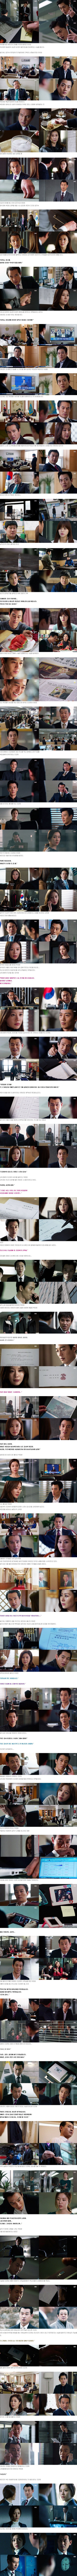 episode 10 captures for the Korean drama 'Punch - Drama'